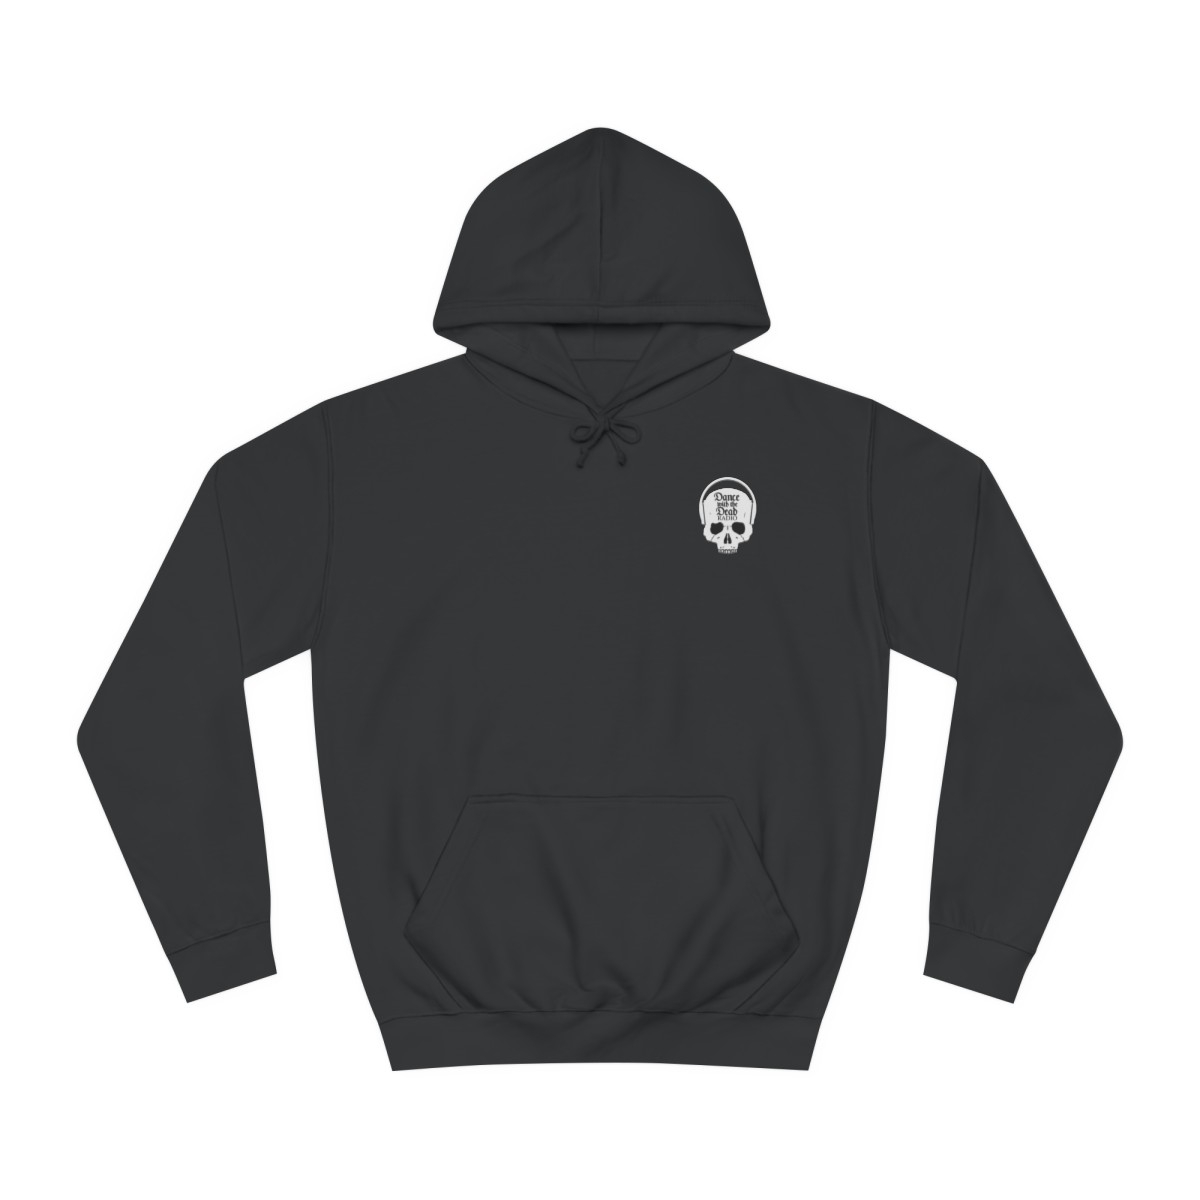 Dance With The Dead Radio Skully Logo College Hoodie product thumbnail image